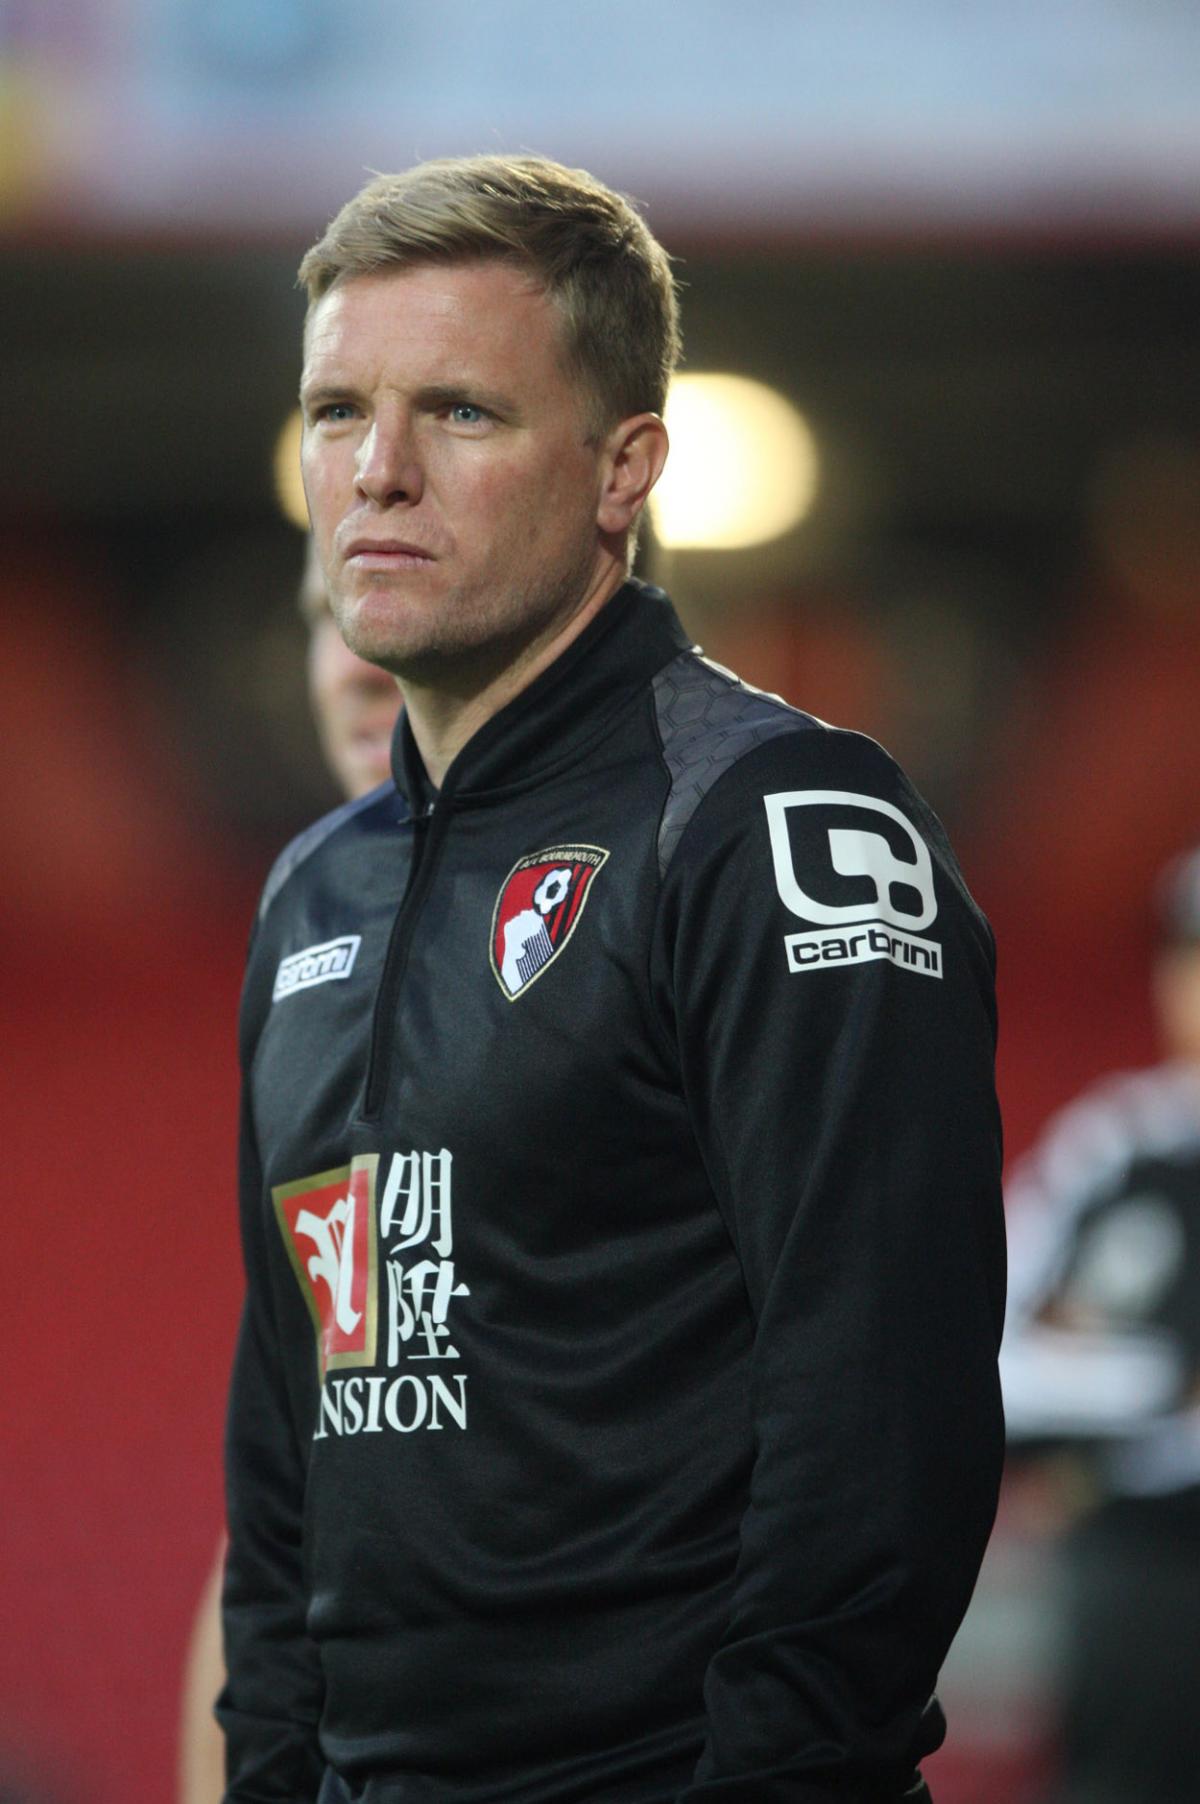 All the pictures from AFC Bournemouth v Cardiff City at the Vitality Stadium on July 31, 2015 by Mick Cunningham 